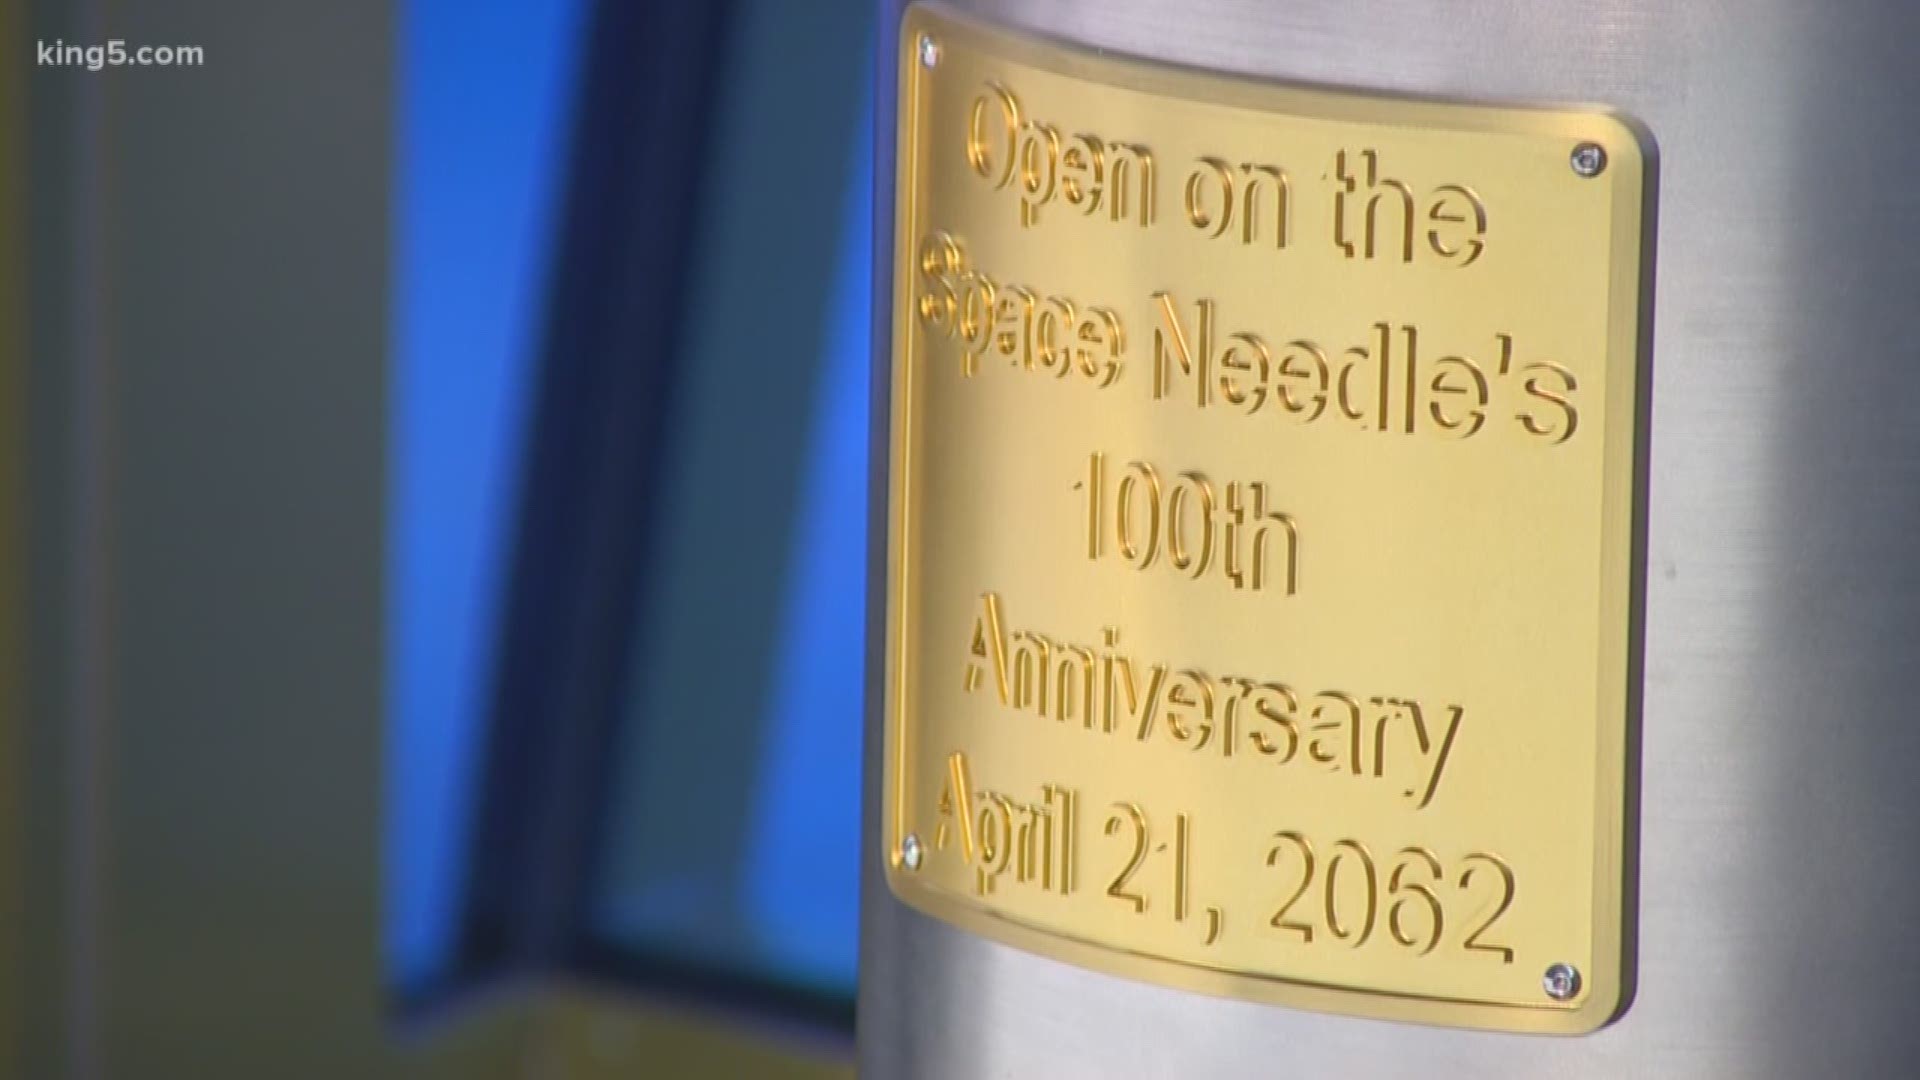 The time capsule won't be opened until April 21, 2062, the Space Needle's 100th anniversary.